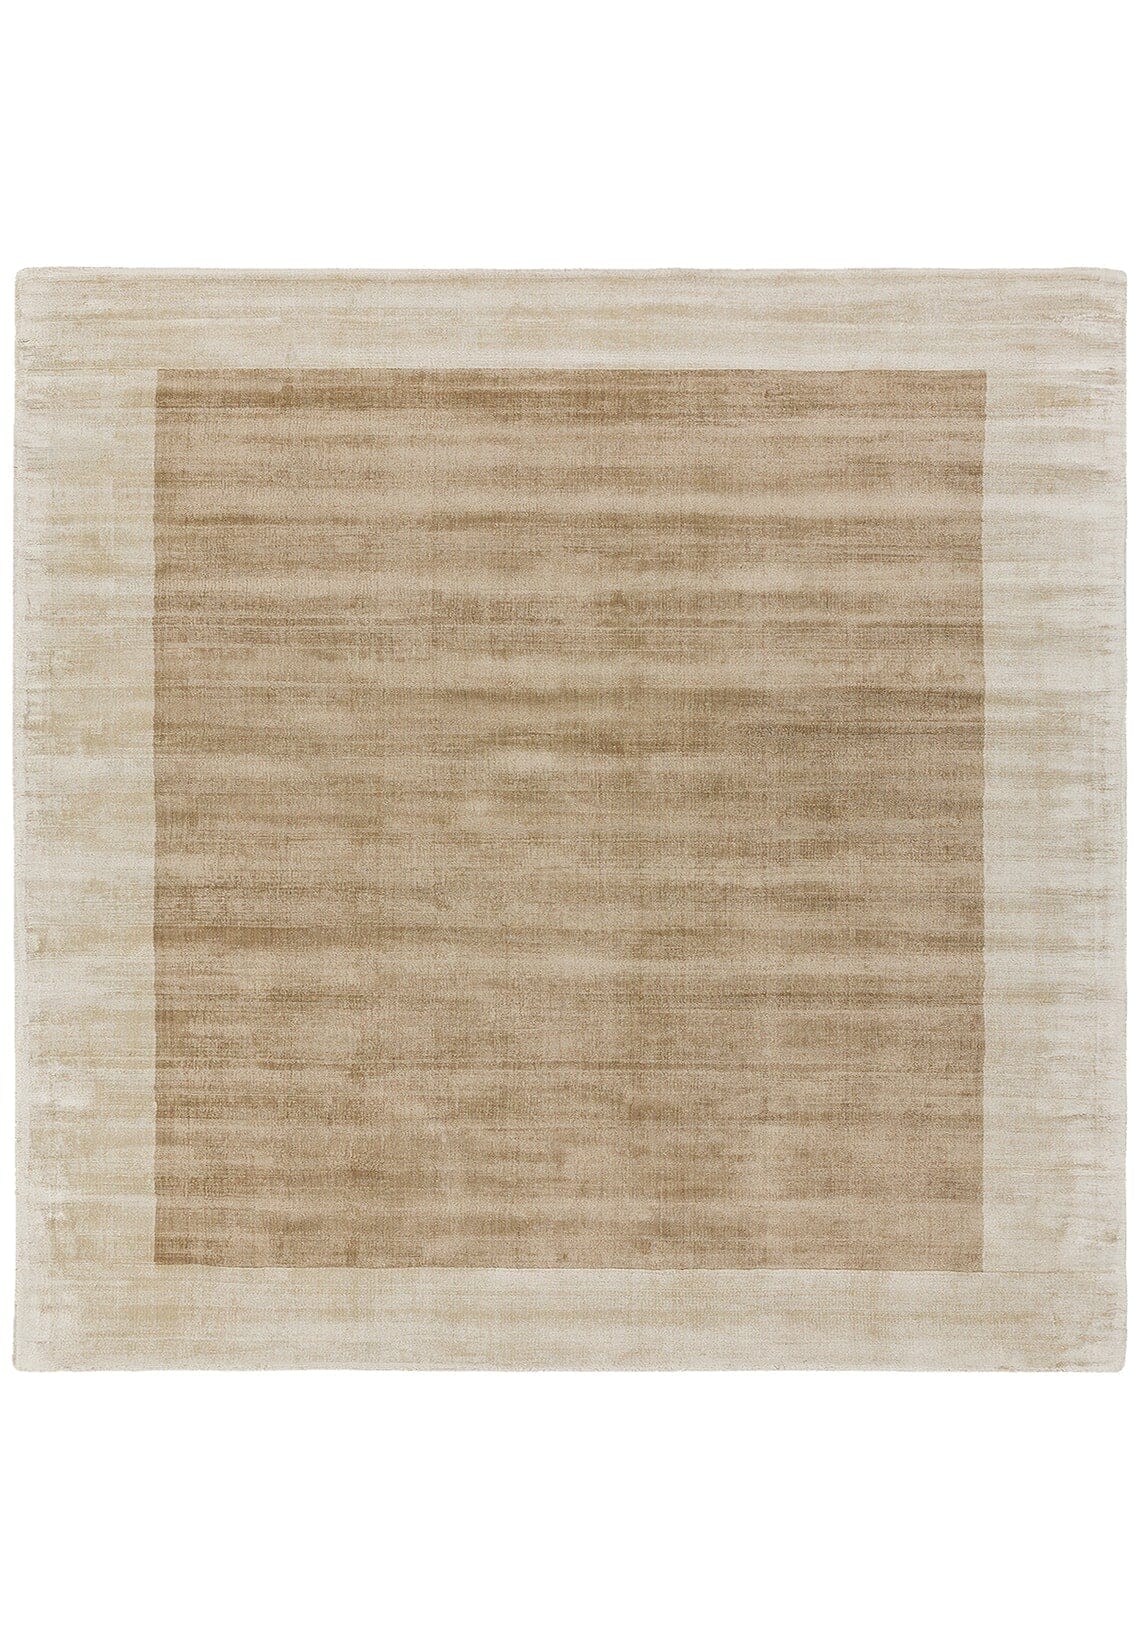  Asiatic Carpets-Asiatic Carpets Blade Hand Woven Rug Putty Champagne - 200 x 290cm-Beige, Natural 077 